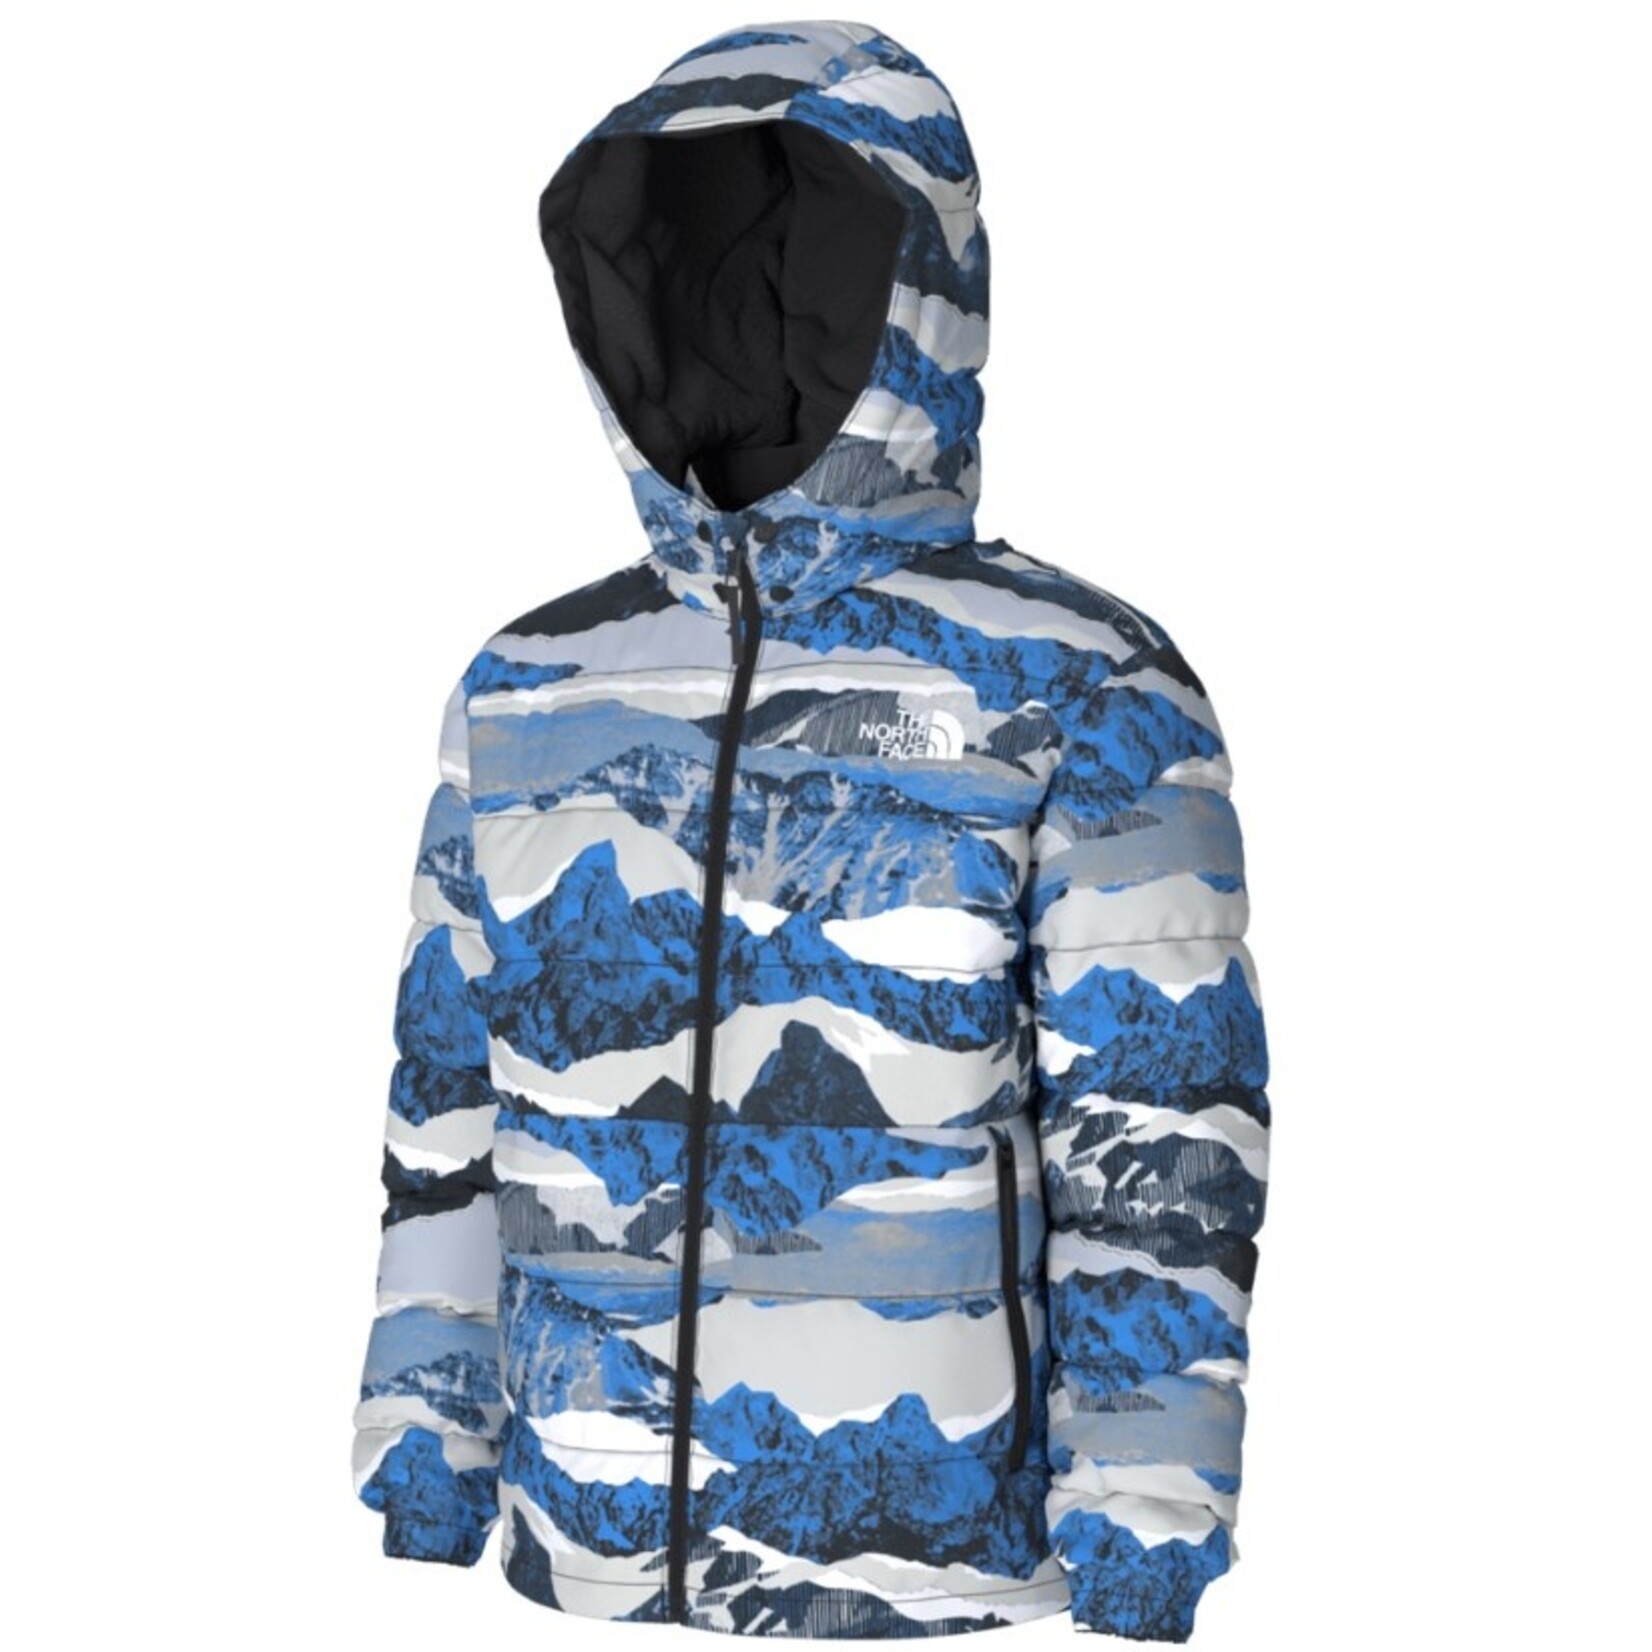 THE NORTH FACE Boys' Reversible Mt Chimbo Full Zip Hooded Jacket-24